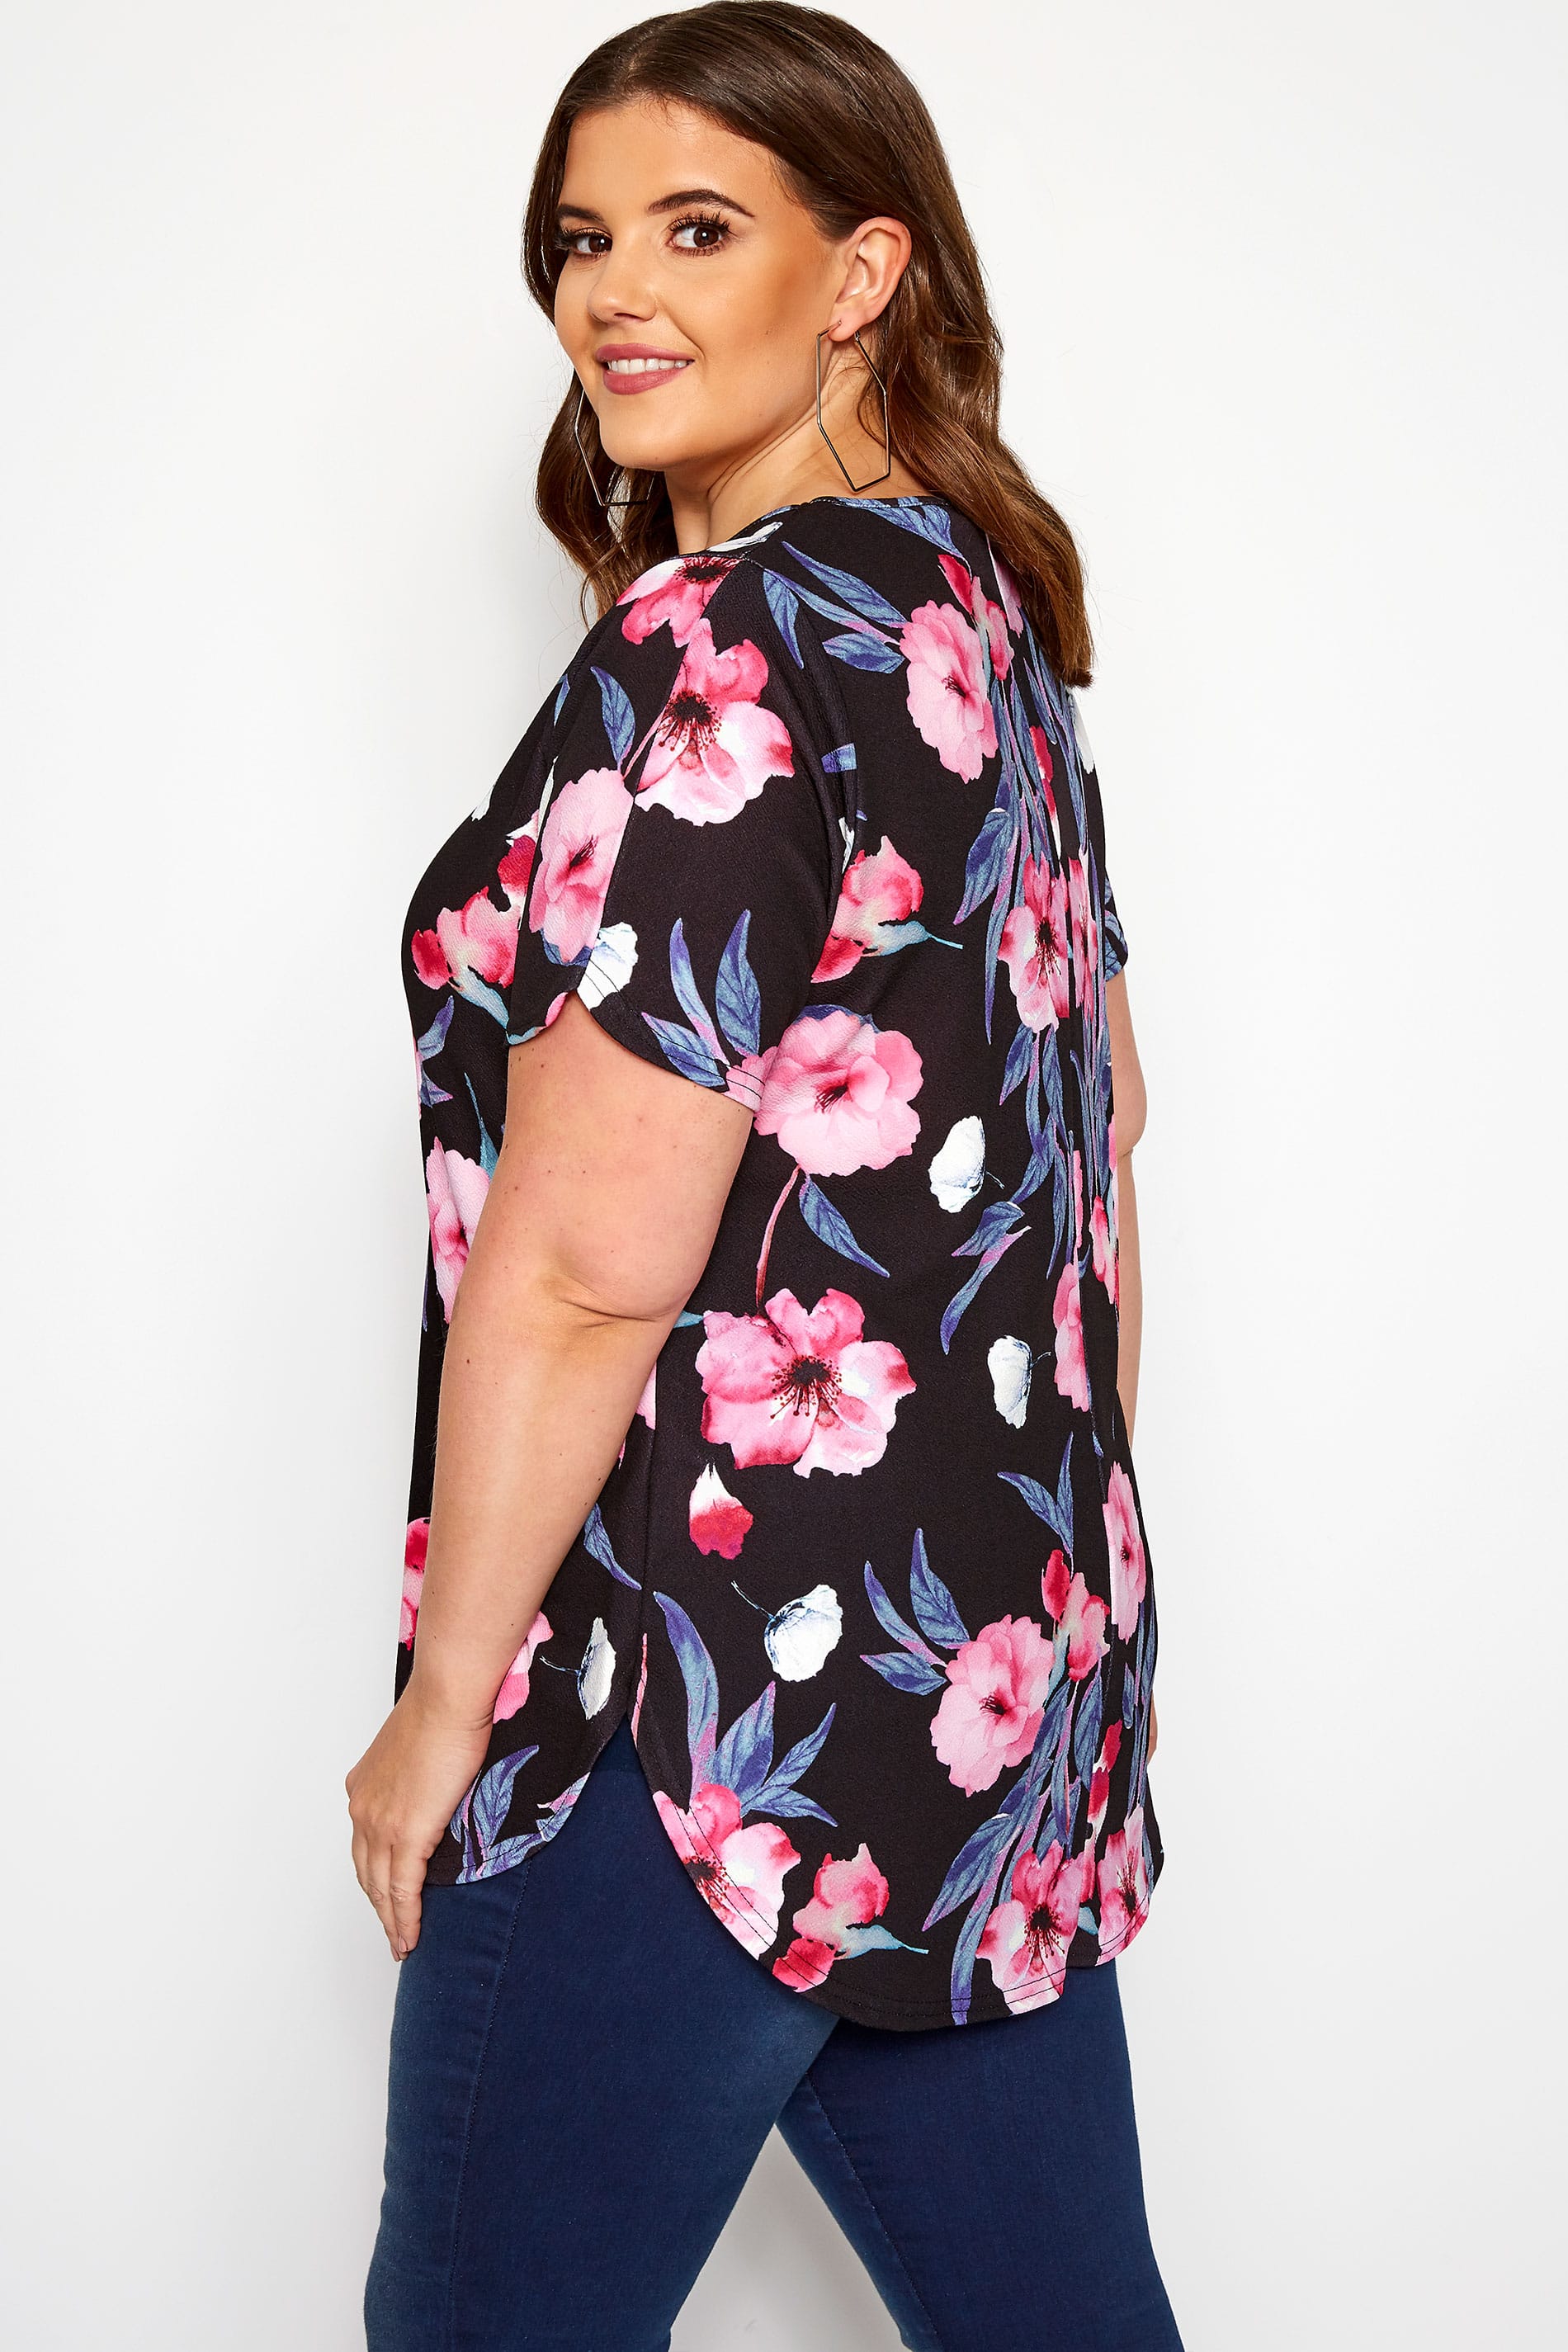 Black & Pink Floral Top | Yours Clothing